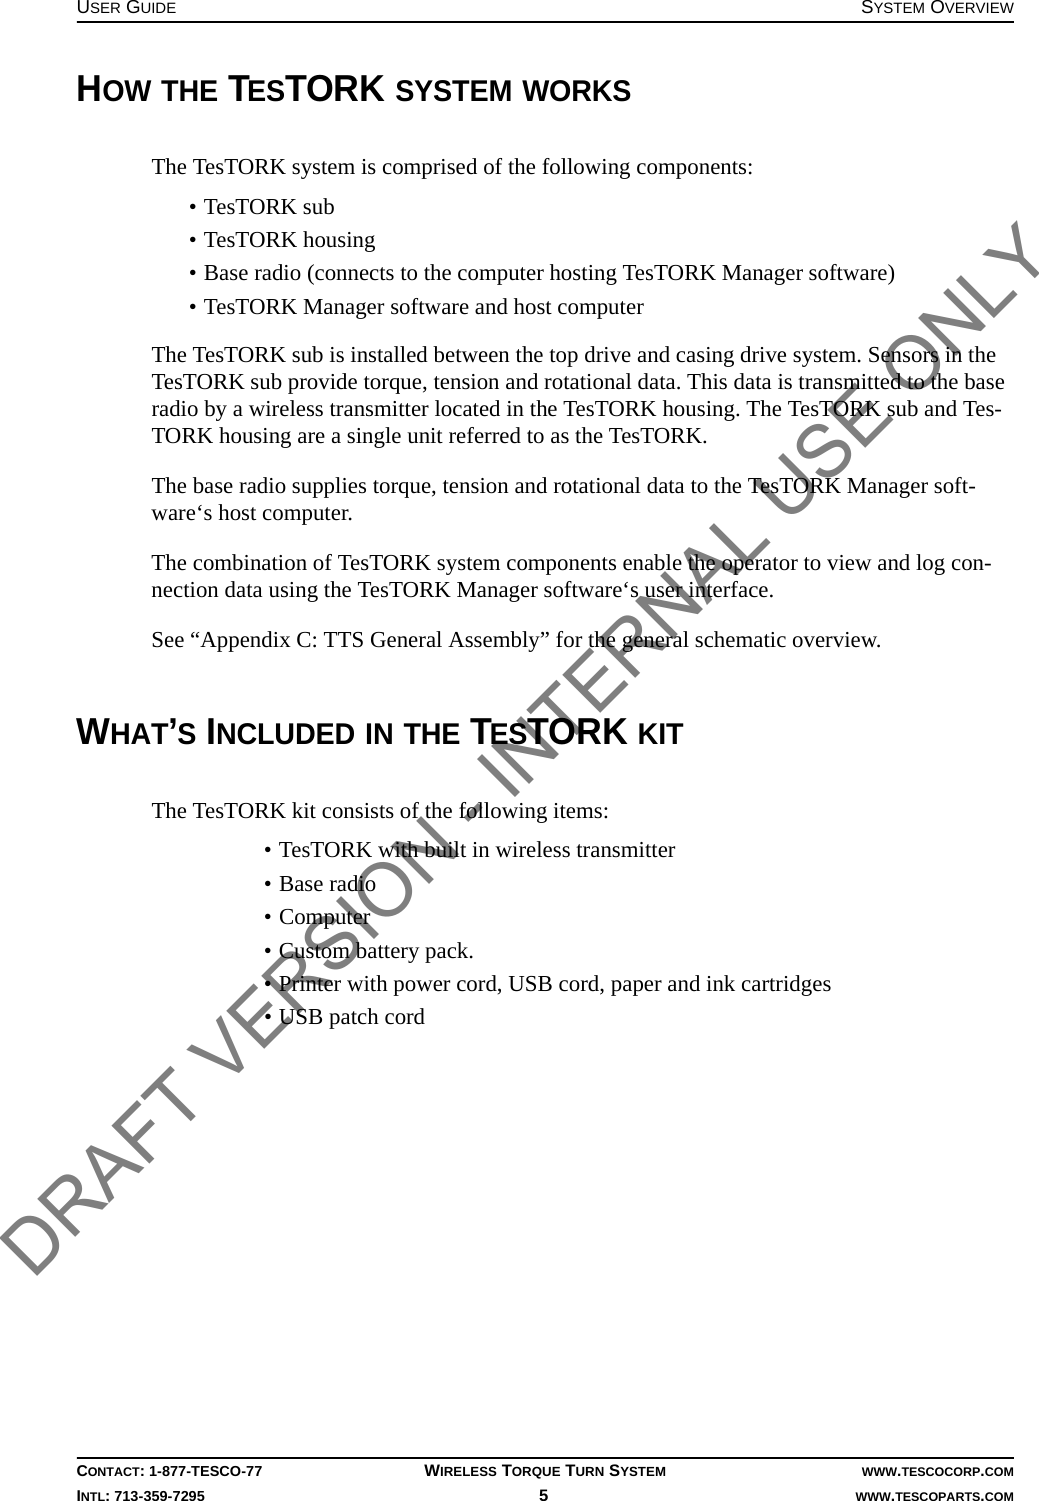 USER GUIDE SYSTEM OVERVIEWCONTACT: 1-877-TESCO-77 WIRELESS TORQUE TURN SYSTEM WWW.TESCOCORP.COMINTL: 713-359-7295 5   WWW.TESCOPARTS.COMHOW THE TESTORK SYSTEM WORKSThe TesTORK system is comprised of the following components:• TesTORK sub• TesTORK housing• Base radio (connects to the computer hosting TesTORK Manager software)• TesTORK Manager software and host computerThe TesTORK sub is installed between the top drive and casing drive system. Sensors in the TesTORK sub provide torque, tension and rotational data. This data is transmitted to the base radio by a wireless transmitter located in the TesTORK housing. The TesTORK sub and Tes-TORK housing are a single unit referred to as the TesTORK.The base radio supplies torque, tension and rotational data to the TesTORK Manager soft-ware‘s host computer. The combination of TesTORK system components enable the operator to view and log con-nection data using the TesTORK Manager software‘s user interface.See “Appendix C: TTS General Assembly” for the general schematic overview.WHAT’S INCLUDED IN THE TESTORK KITThe TesTORK kit consists of the following items:• TesTORK with built in wireless transmitter• Base radio • Computer• Custom battery pack. • Printer with power cord, USB cord, paper and ink cartridges• USB patch cordDRAFT VERSION - INTERNAL USE ONLY